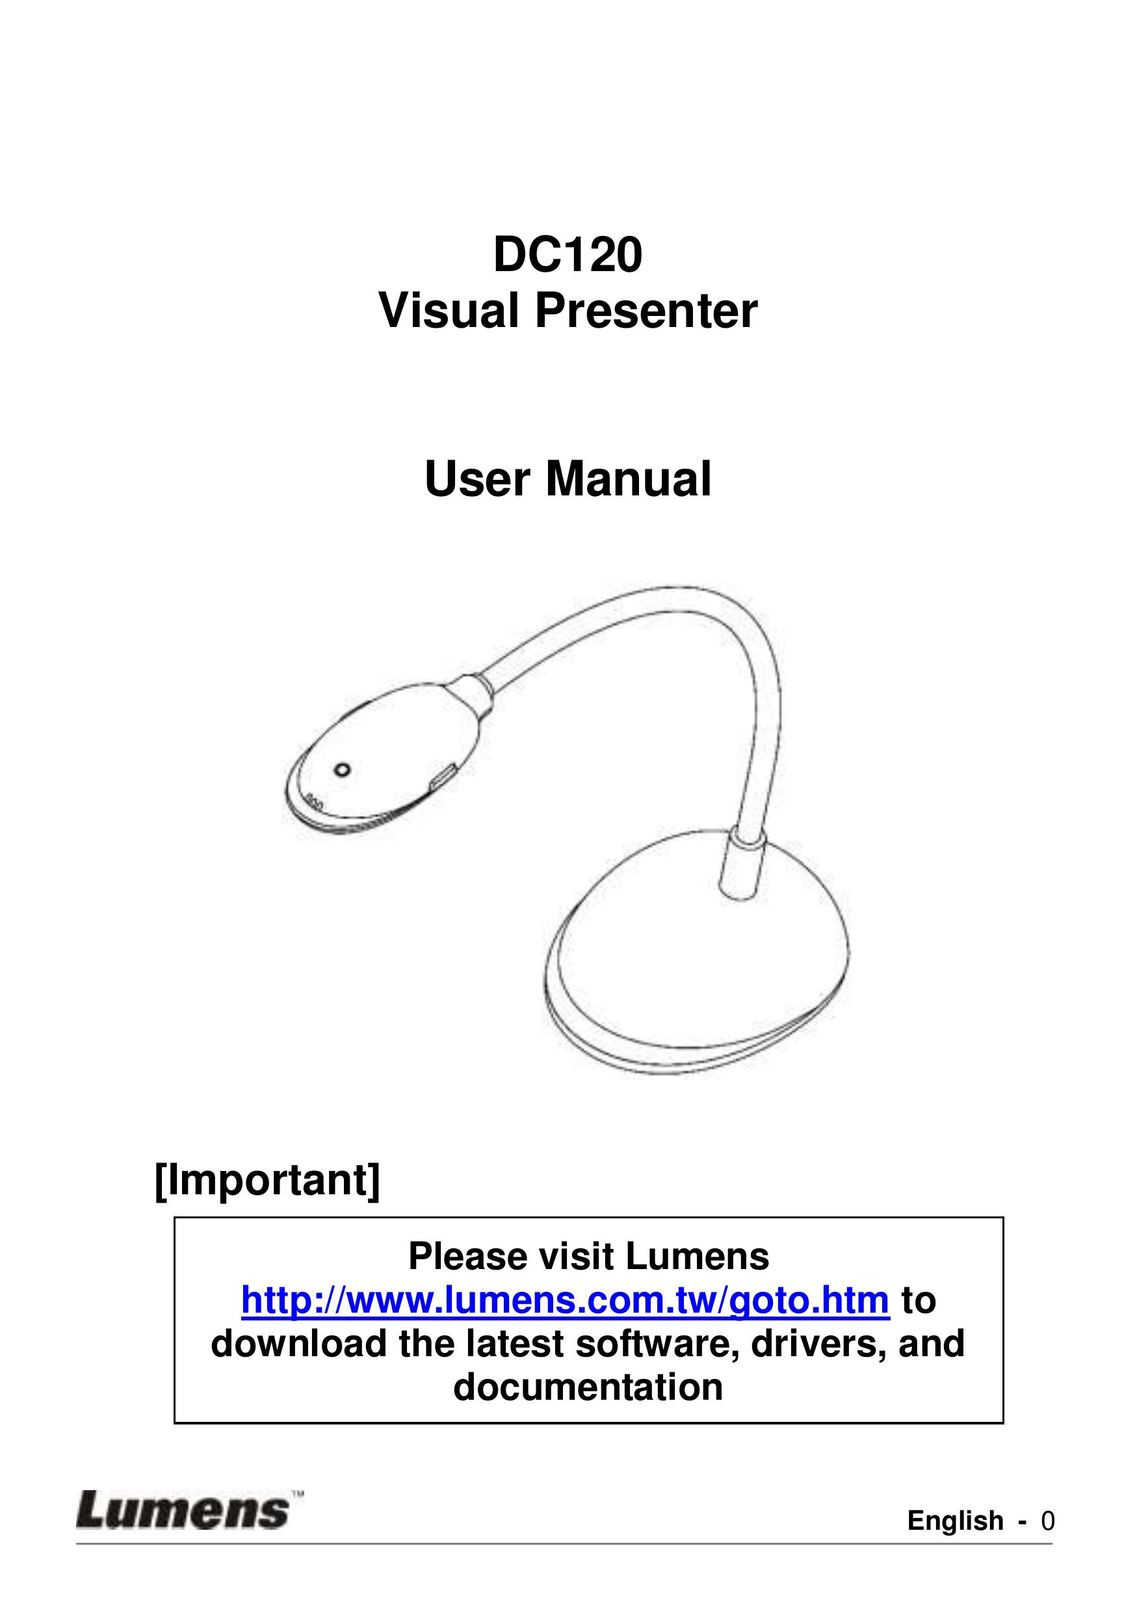 Lumens Technology DC120 Projector User Manual